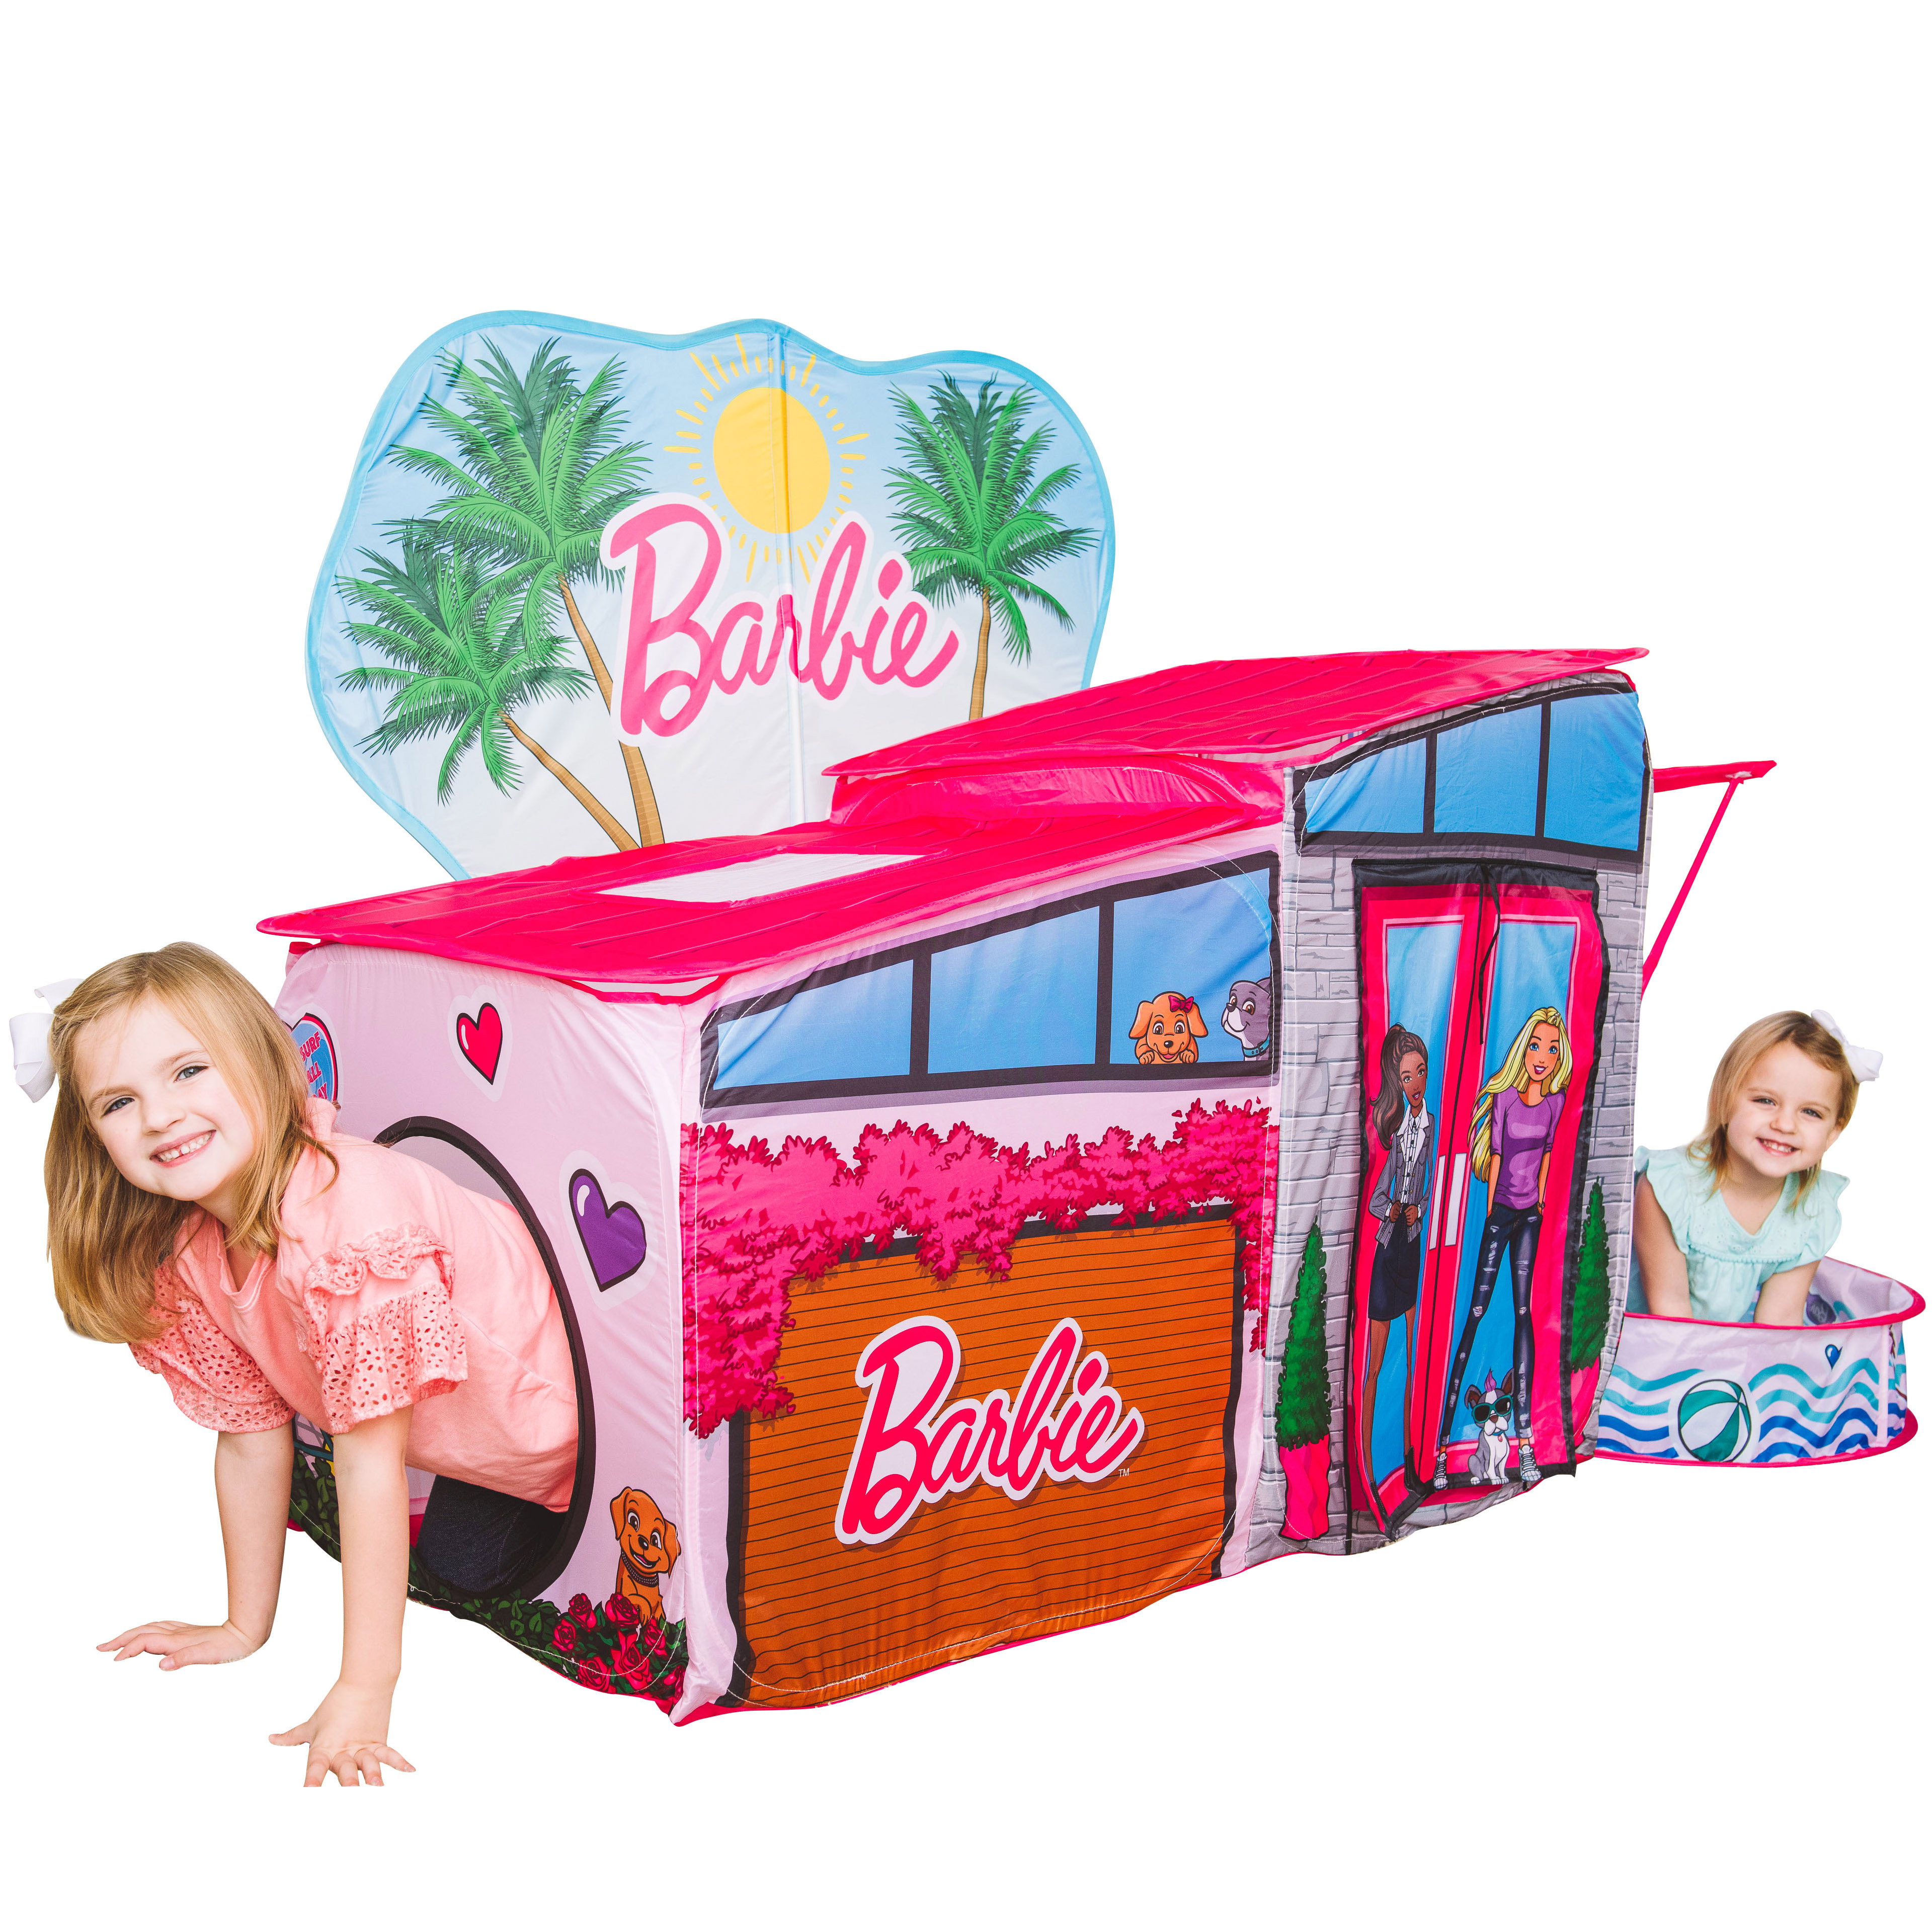 Barbie Dreamhouse 7' Pop-Up Play Tent, Easy Assembly Includes 20 Plastic Balls, Children Ages 3+ - image 1 of 10